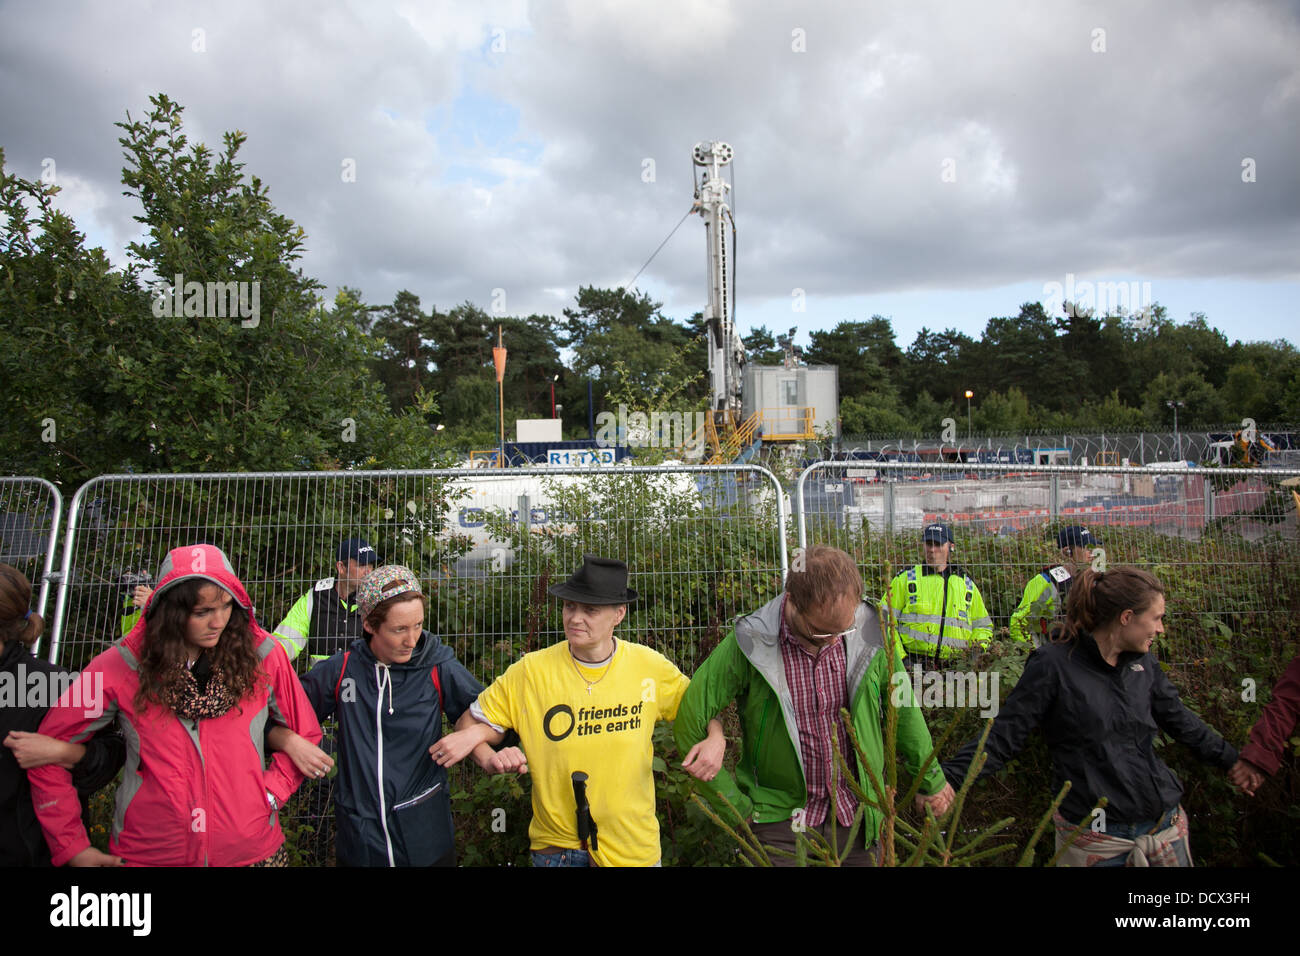 Anti-fracking activists join hands to surround the Cuadrilla fracking site protected by police and G4S security. Stock Photo